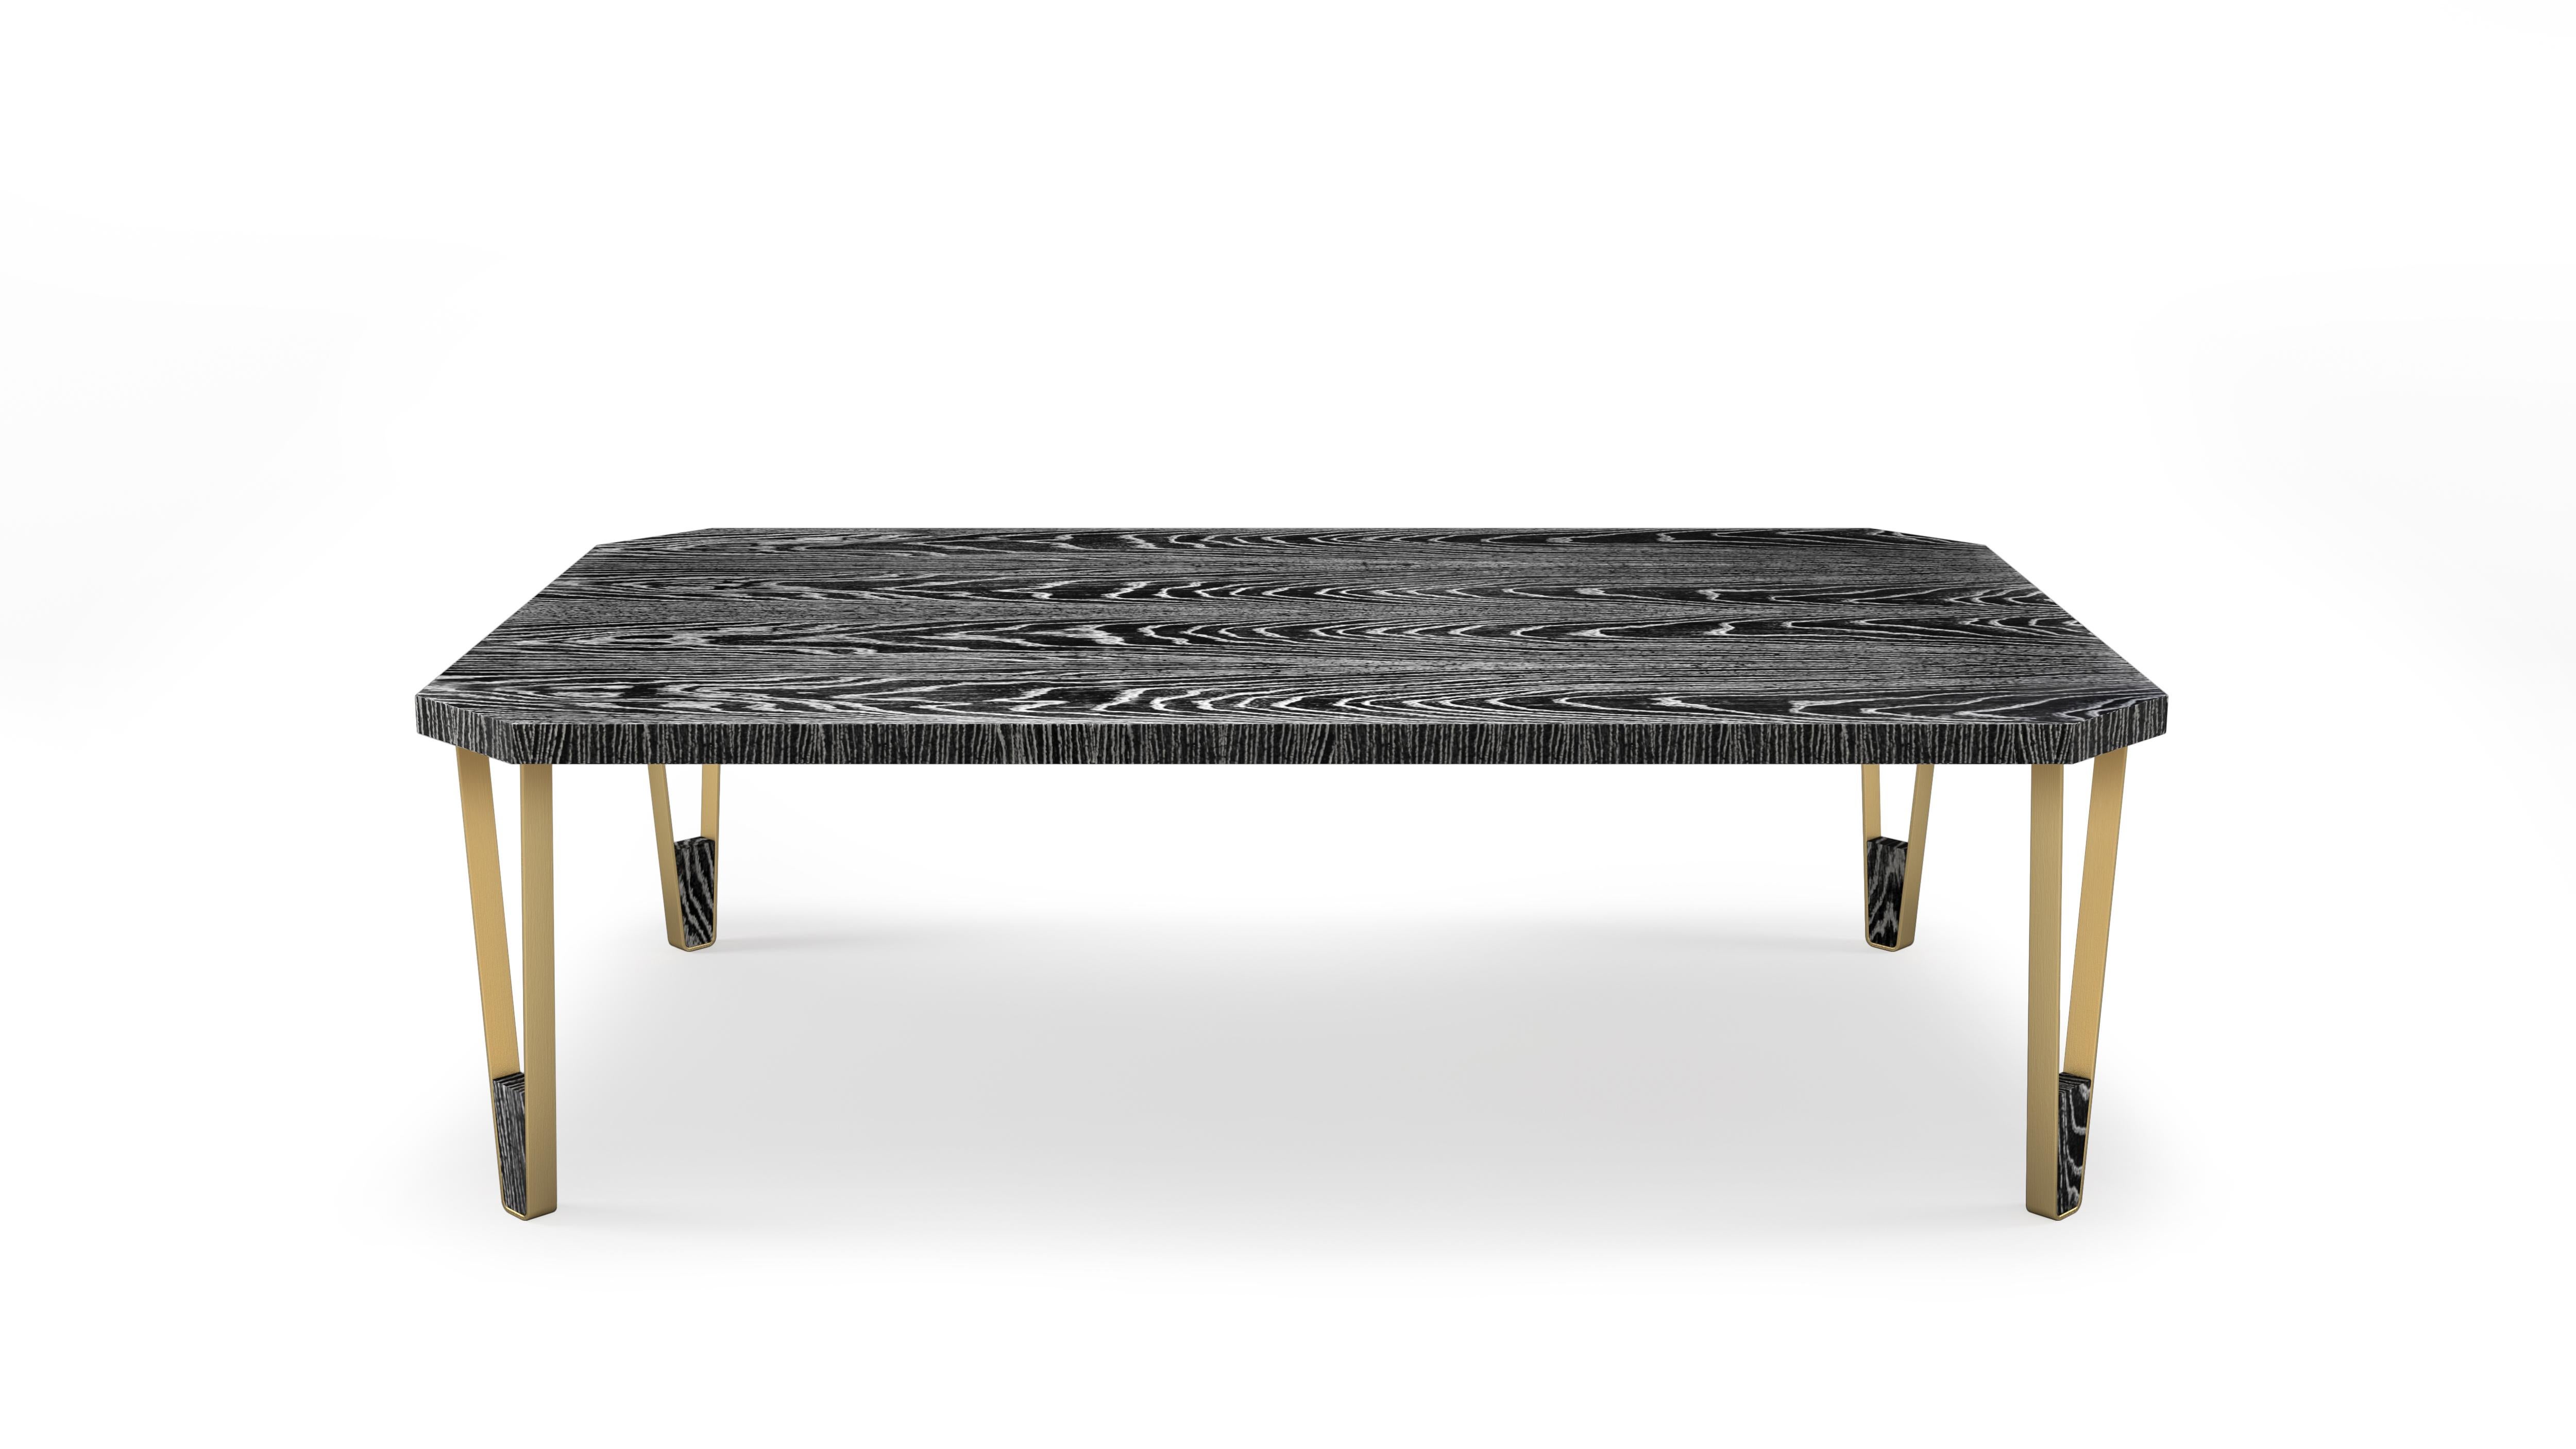 Ionic Rectangular Ebony Limed Oak Coffee Table by InsidherLand
Dimensions: D 80 x W 130 x H 40 cm.
Materials: Ebony limed oak, brushed brass.
28 kg.
Other materials available.

Ionic is one of the three orders of classical architecture developed at